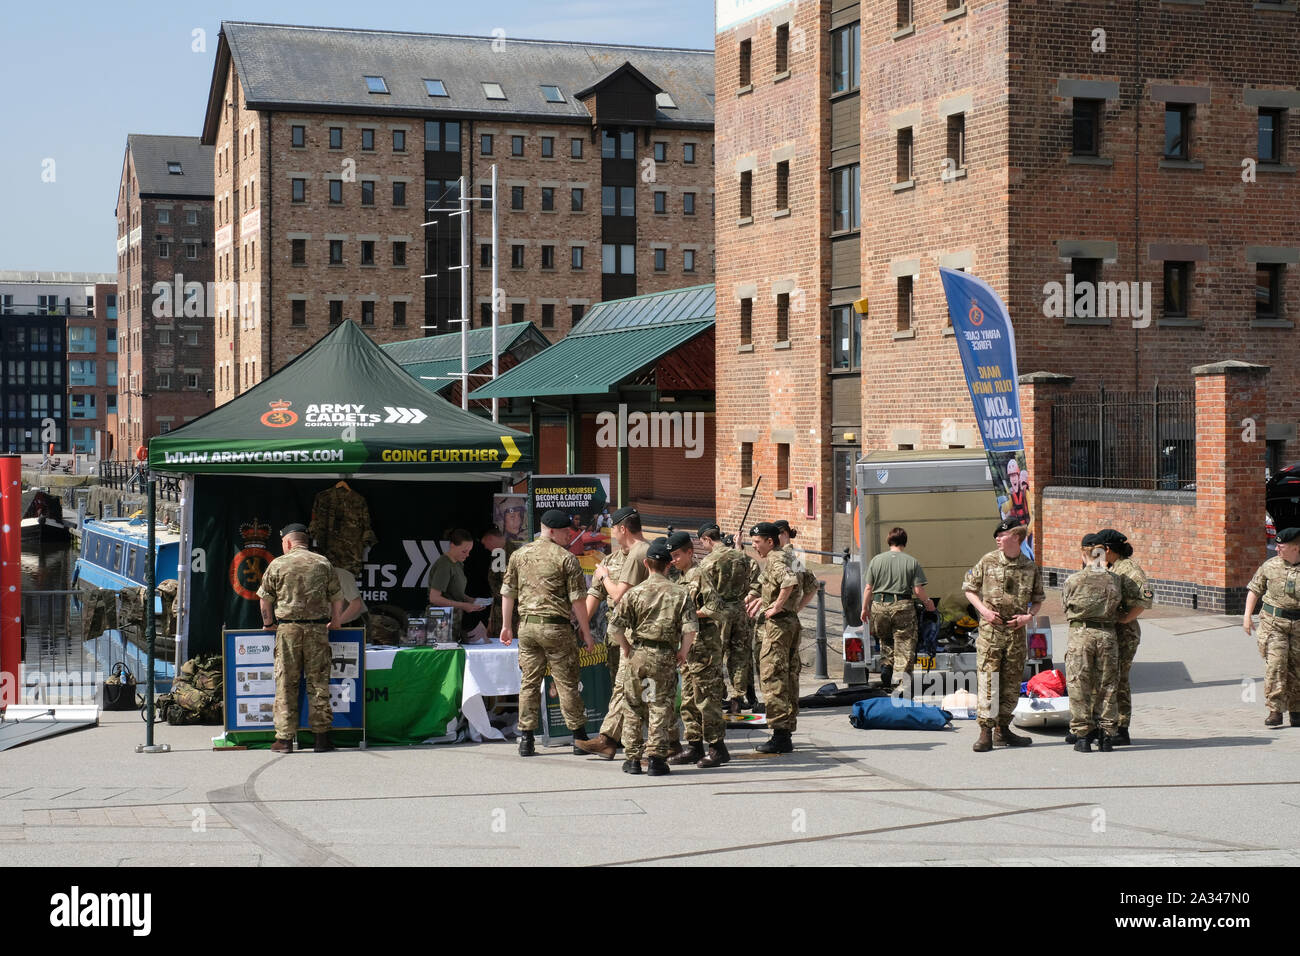 Celebration of Armed Forces Day in Gloucester Docks, southern England Stock Photo